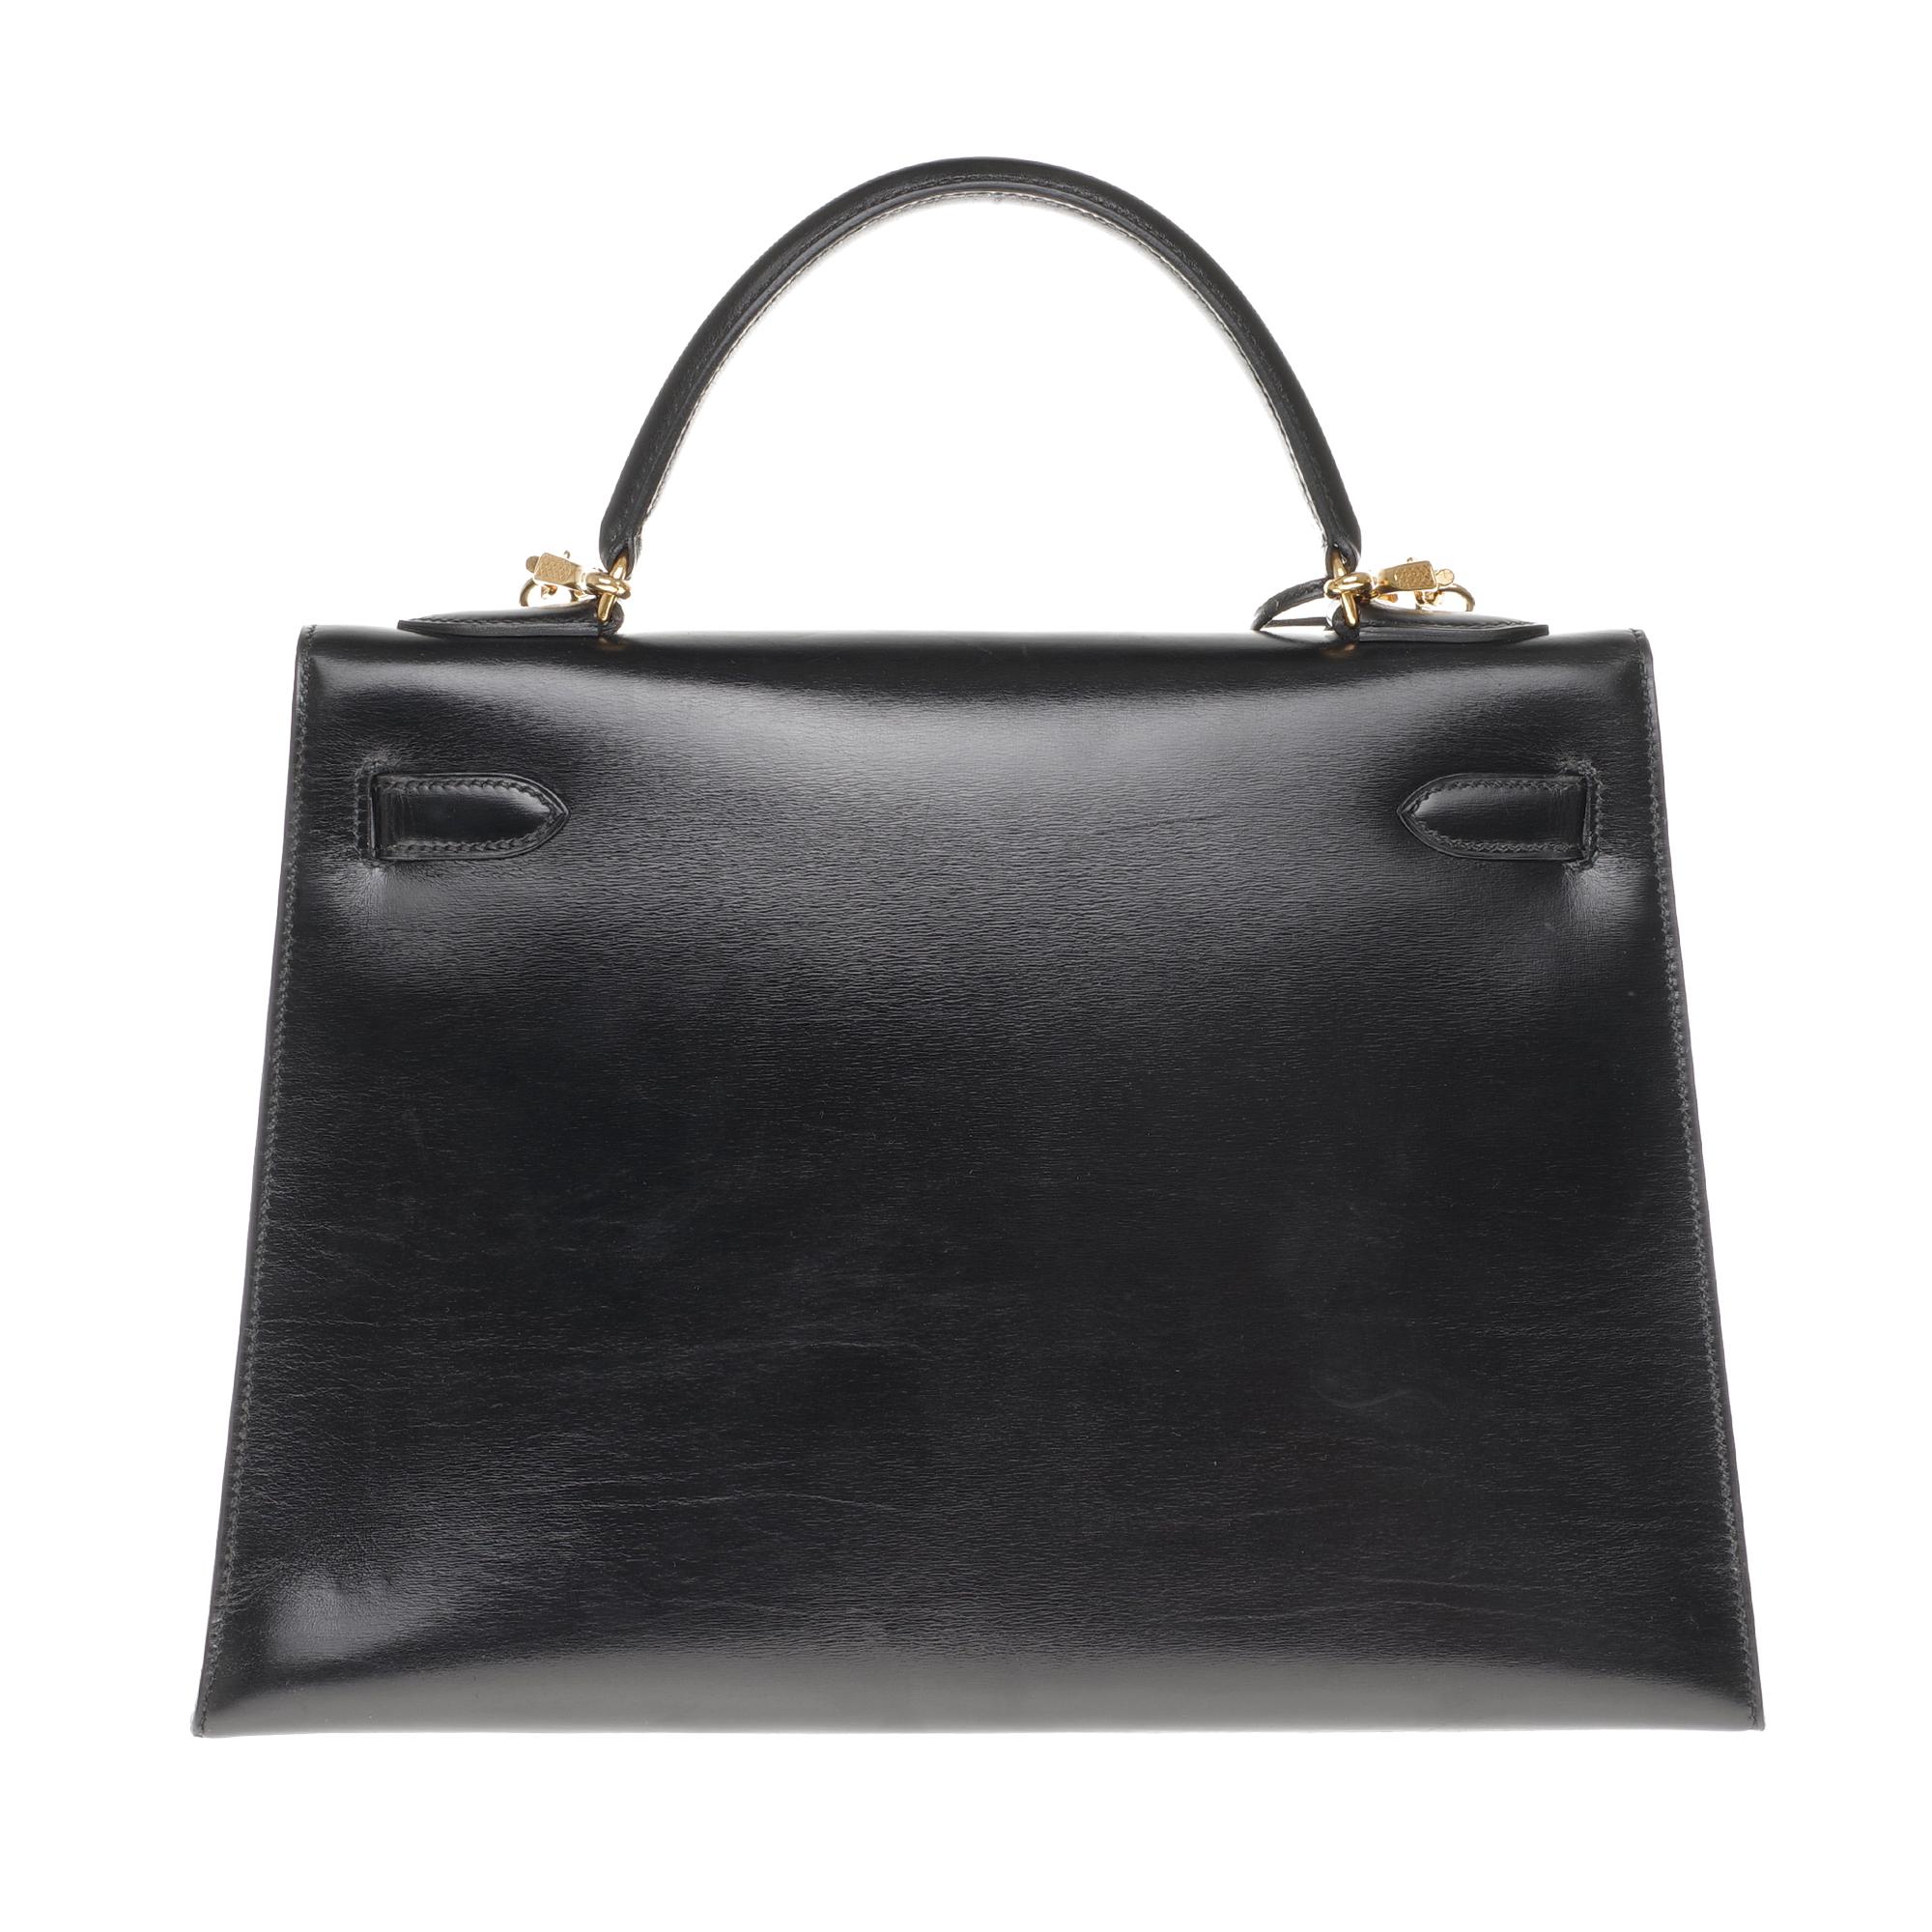 Amazing Hermes Kelly 32 cm with saddle stitching in black calfskin box leather , removable shoulder strap in leather box (unsigned), gold plated metal hardware, single handle in black leather box allowing a hand carry or shoulder strap .
Closure by